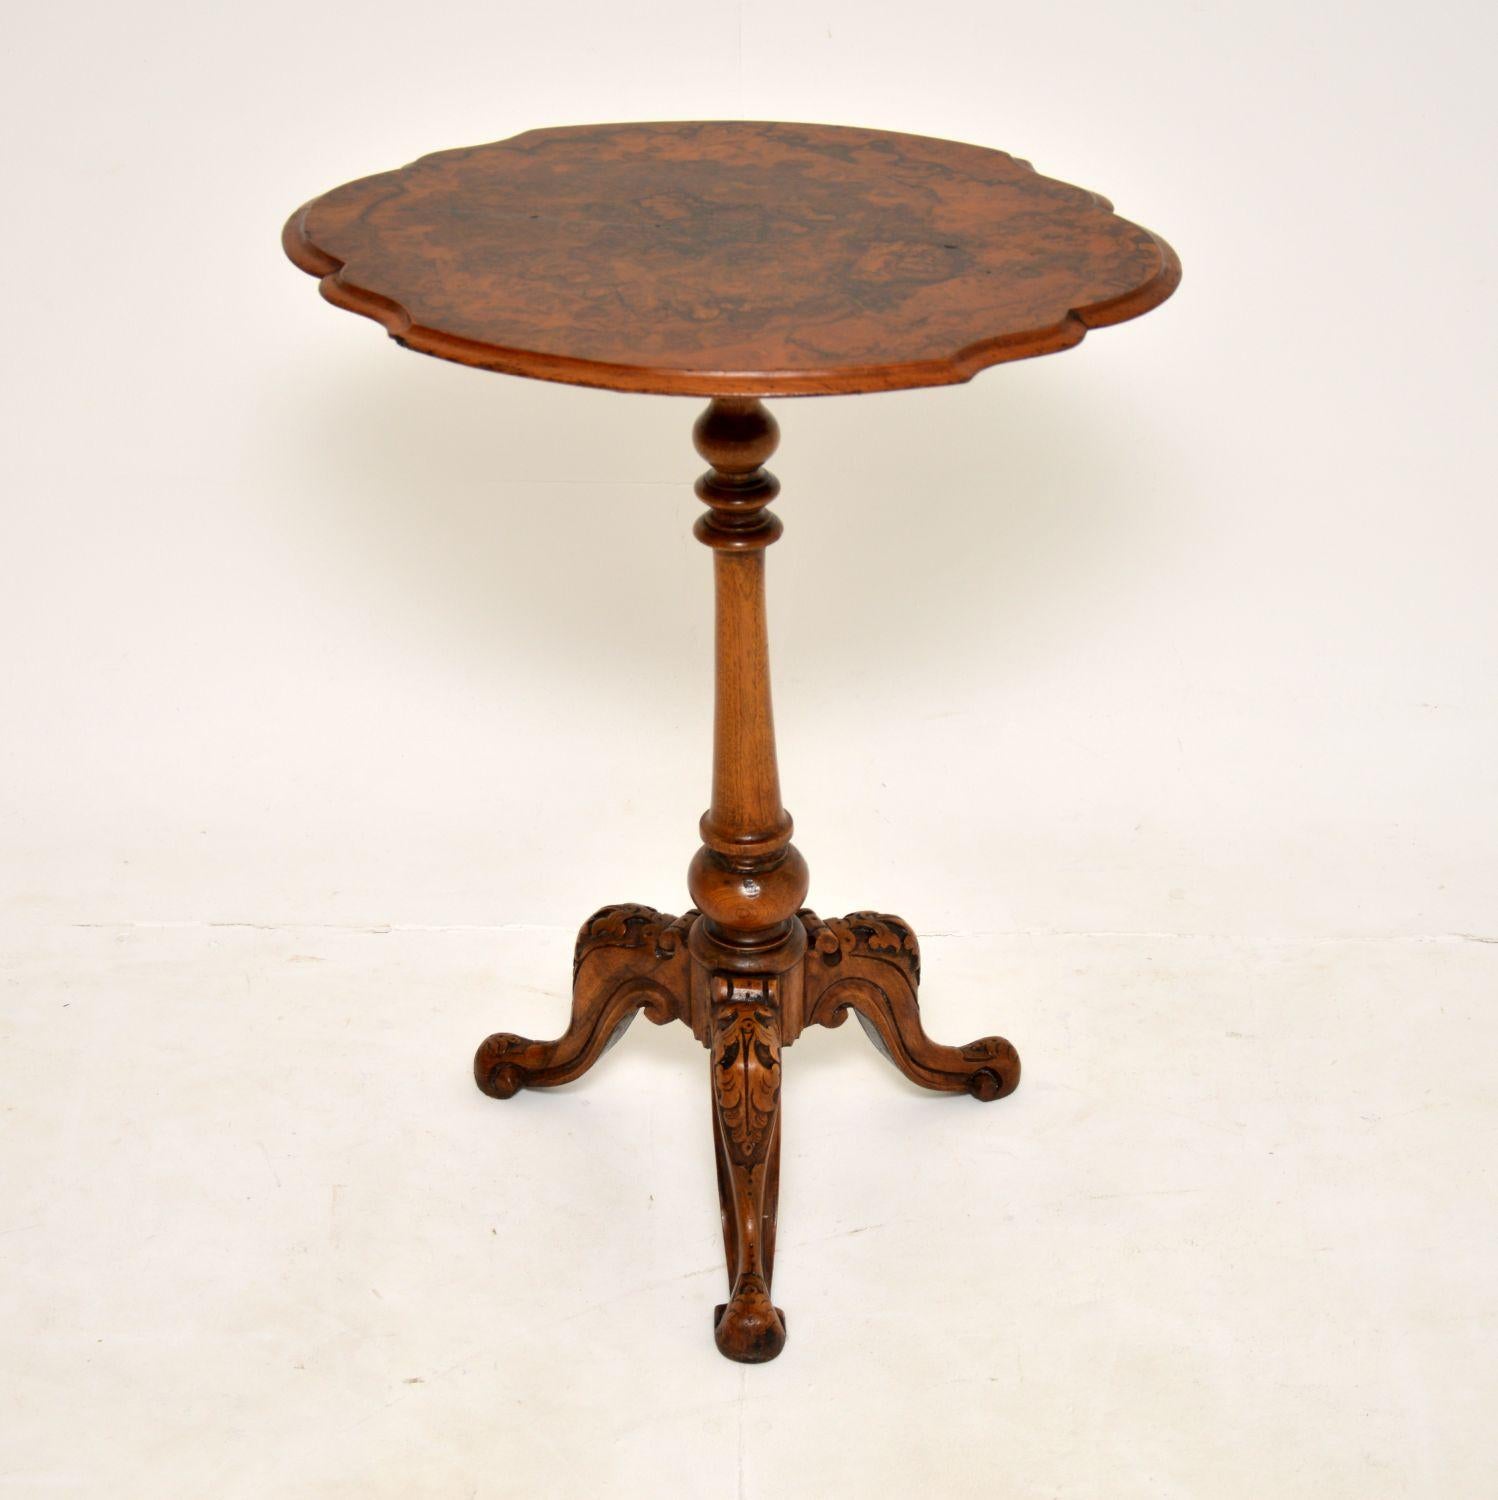 A beautiful and elegant antique Victorian period occasional table in walnut. This was made in England, it dates from around the 1860-1880’s.

The quality is excellent, there is a beautifully shaped top and exquisite carving on the tripod base. The